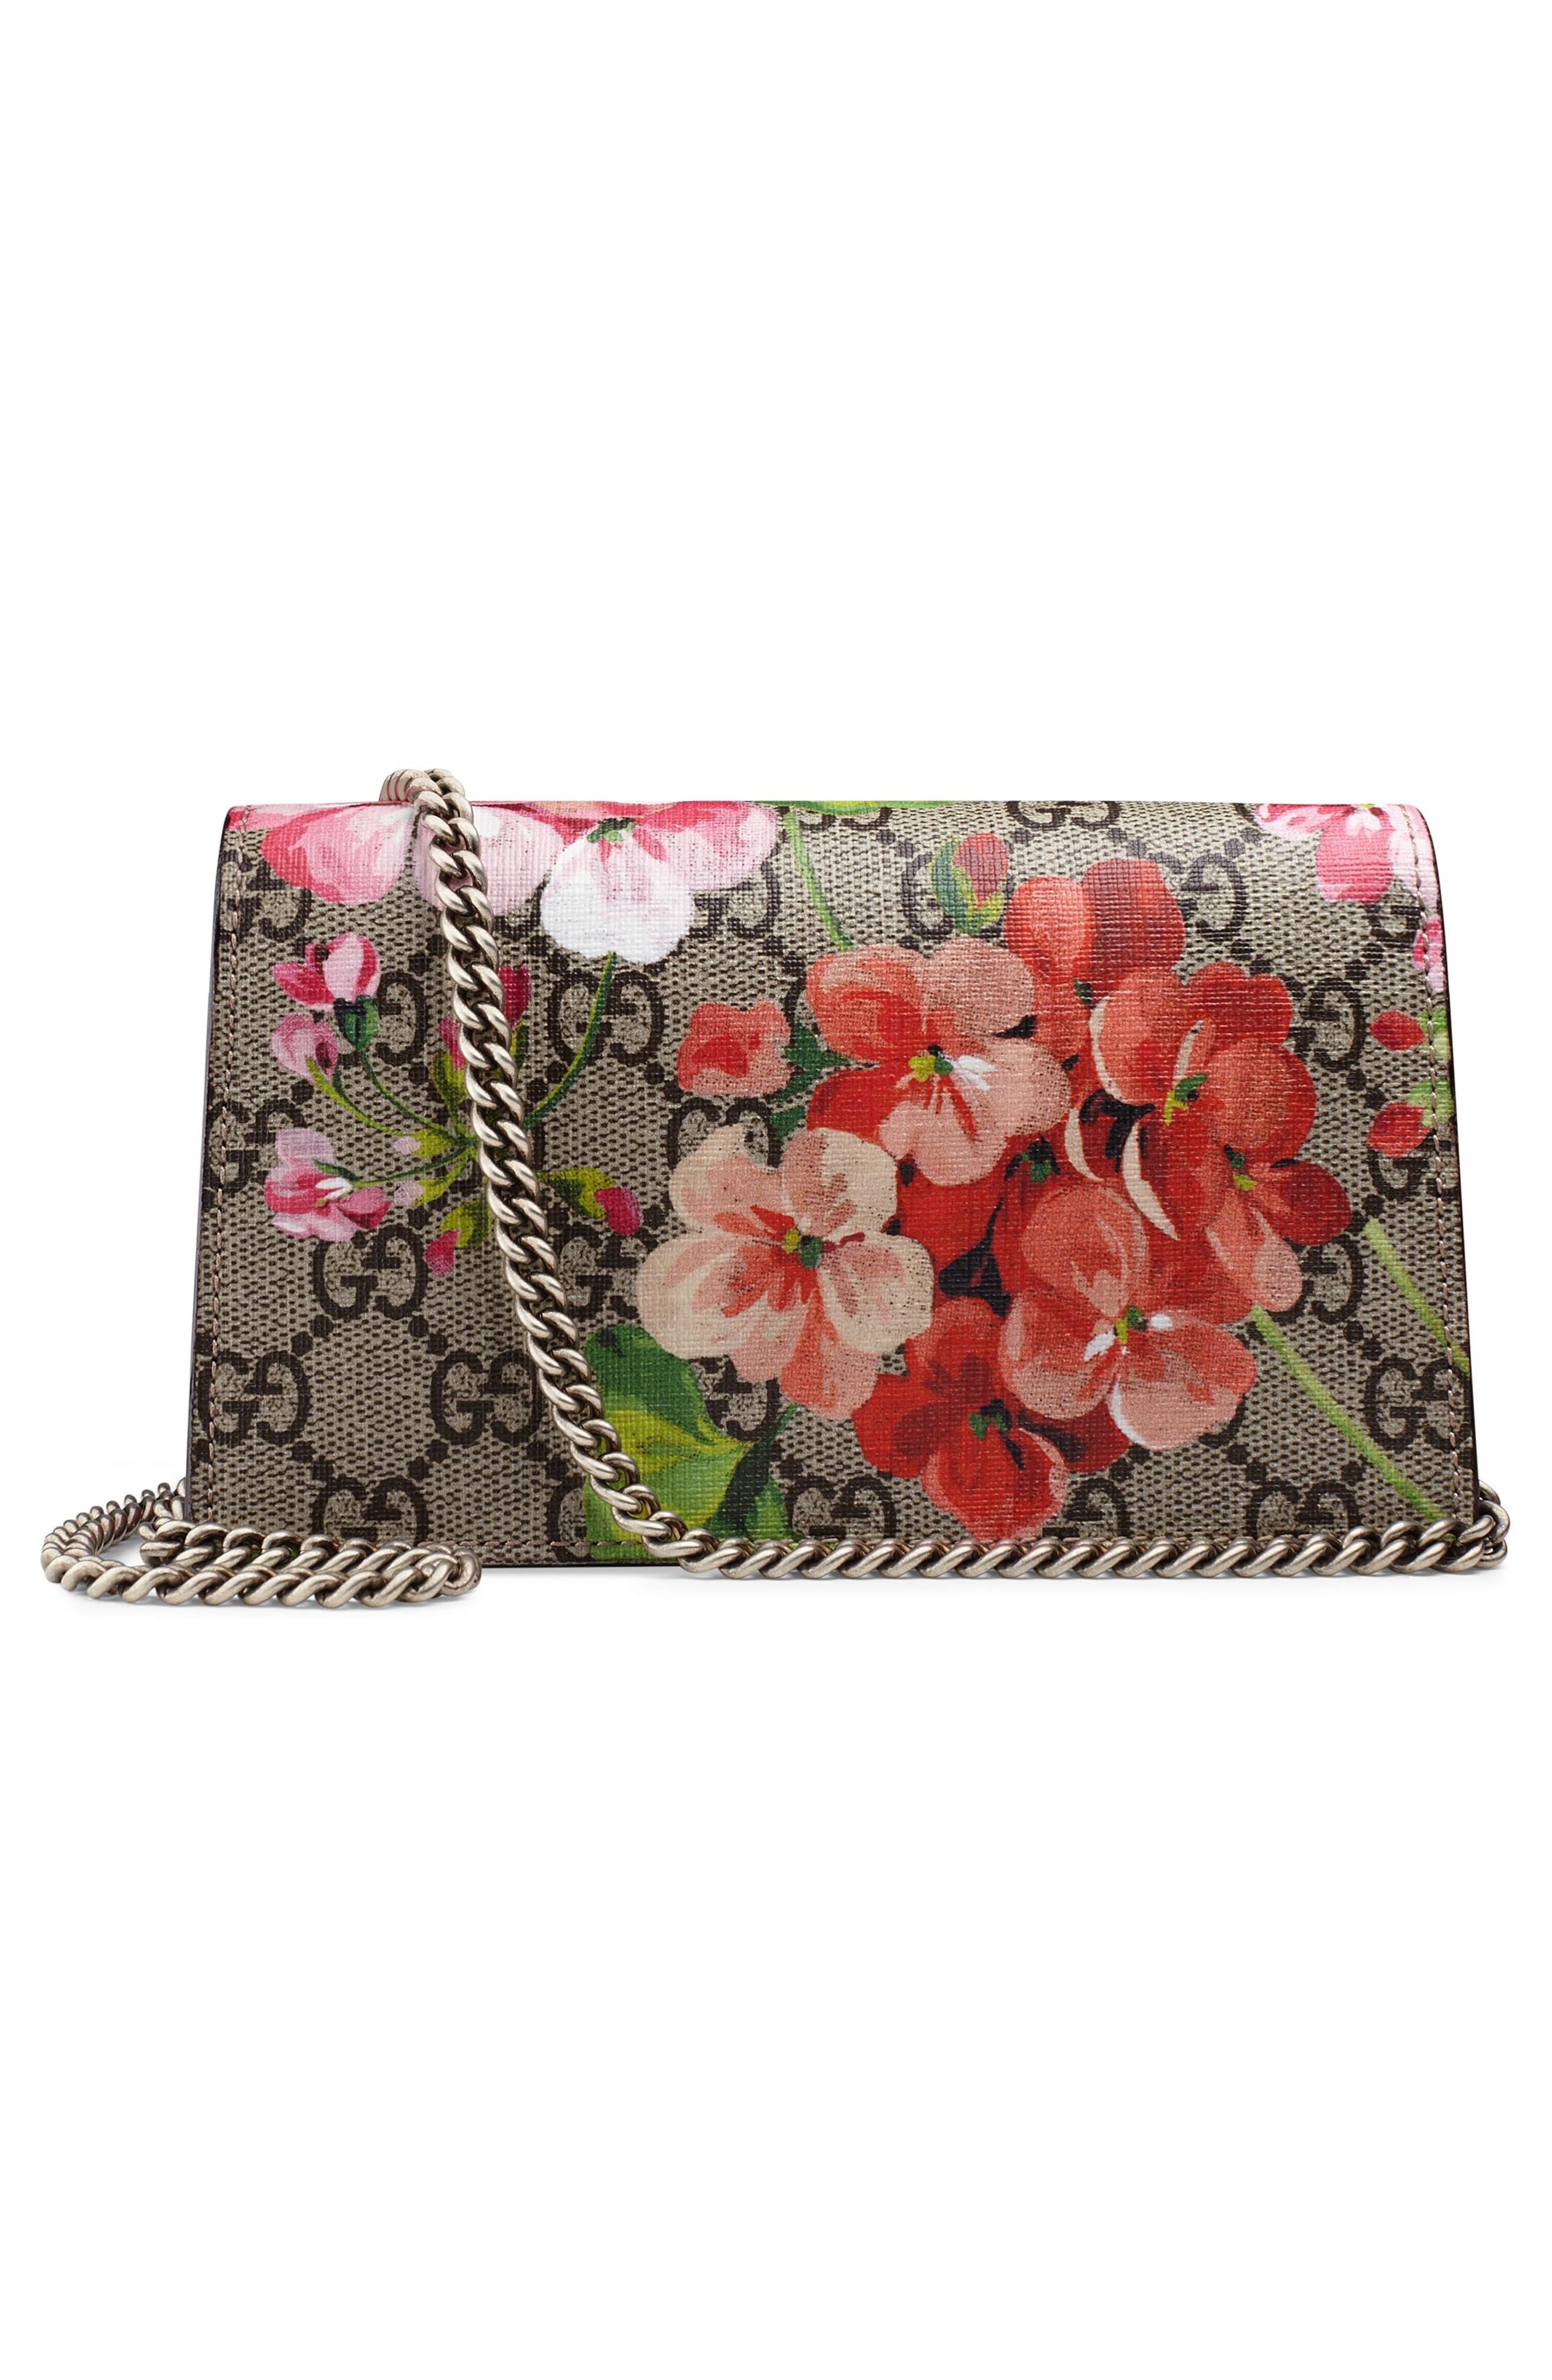 Gucci 2016 Re-edition Dionysus GG Blooms Bag in Natural